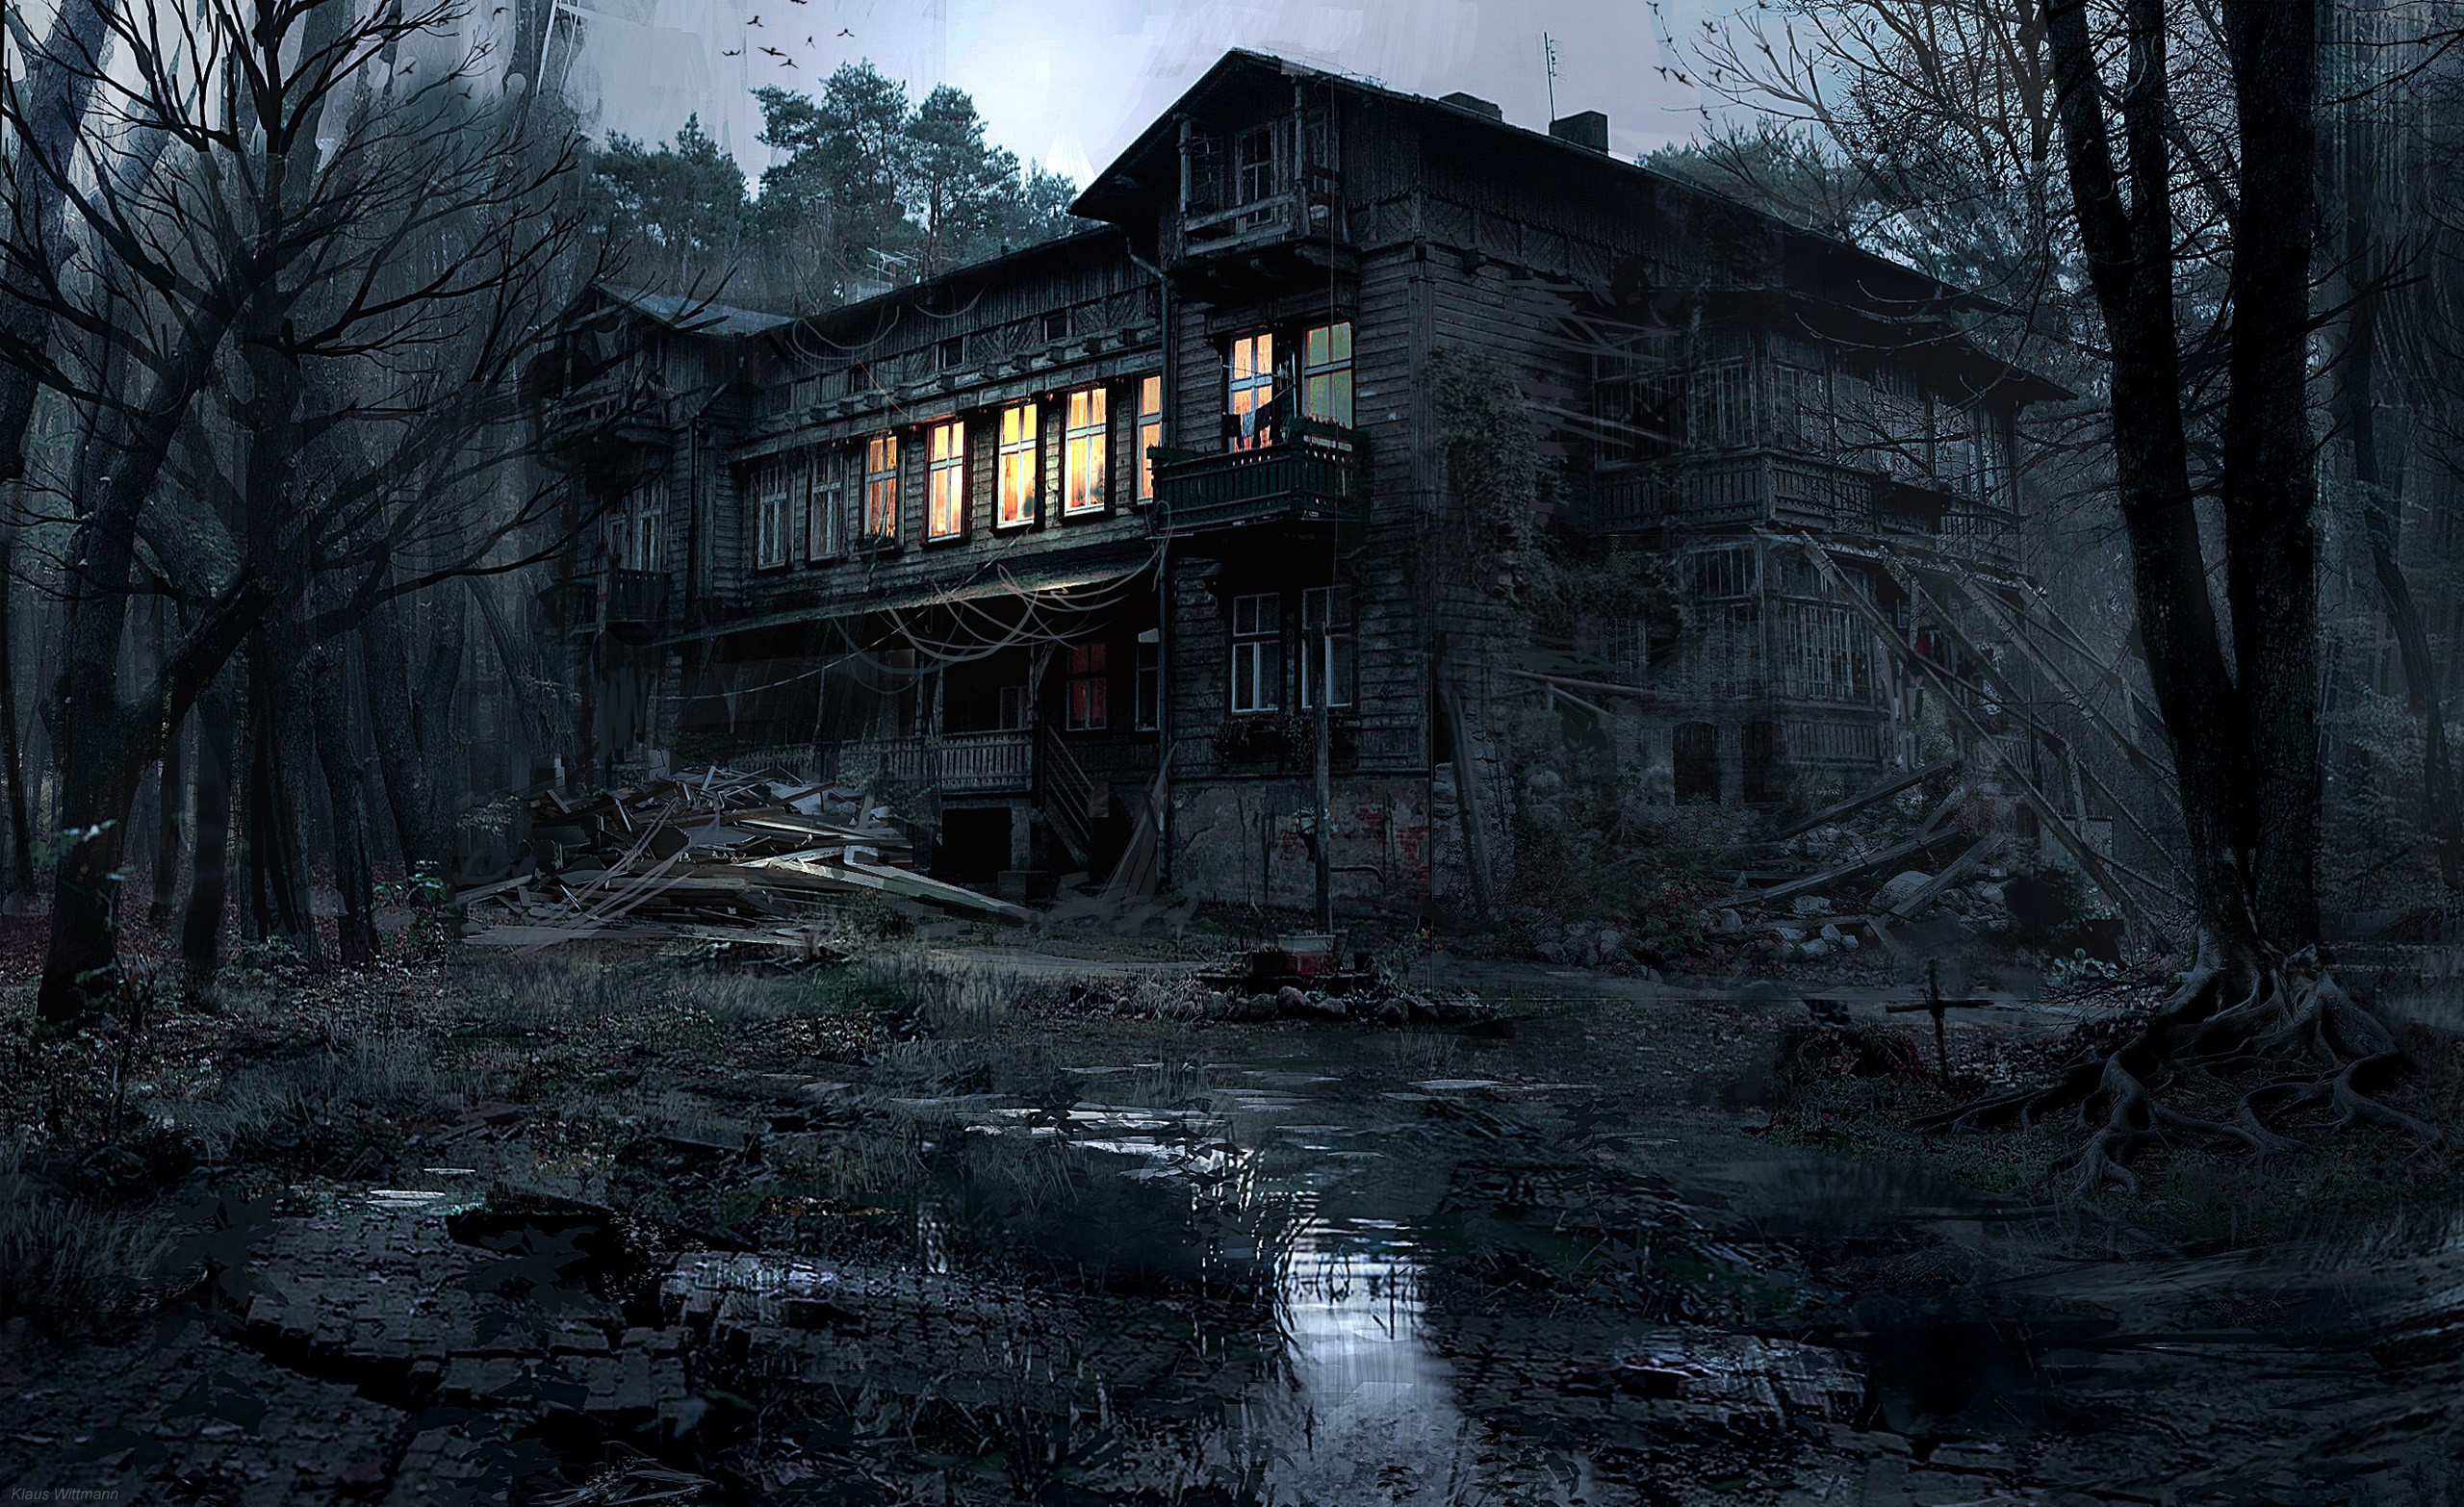 General 2560x1566 house selective coloring abandoned spooky digital art trees haunted mansion water photo manipulation wet dead trees